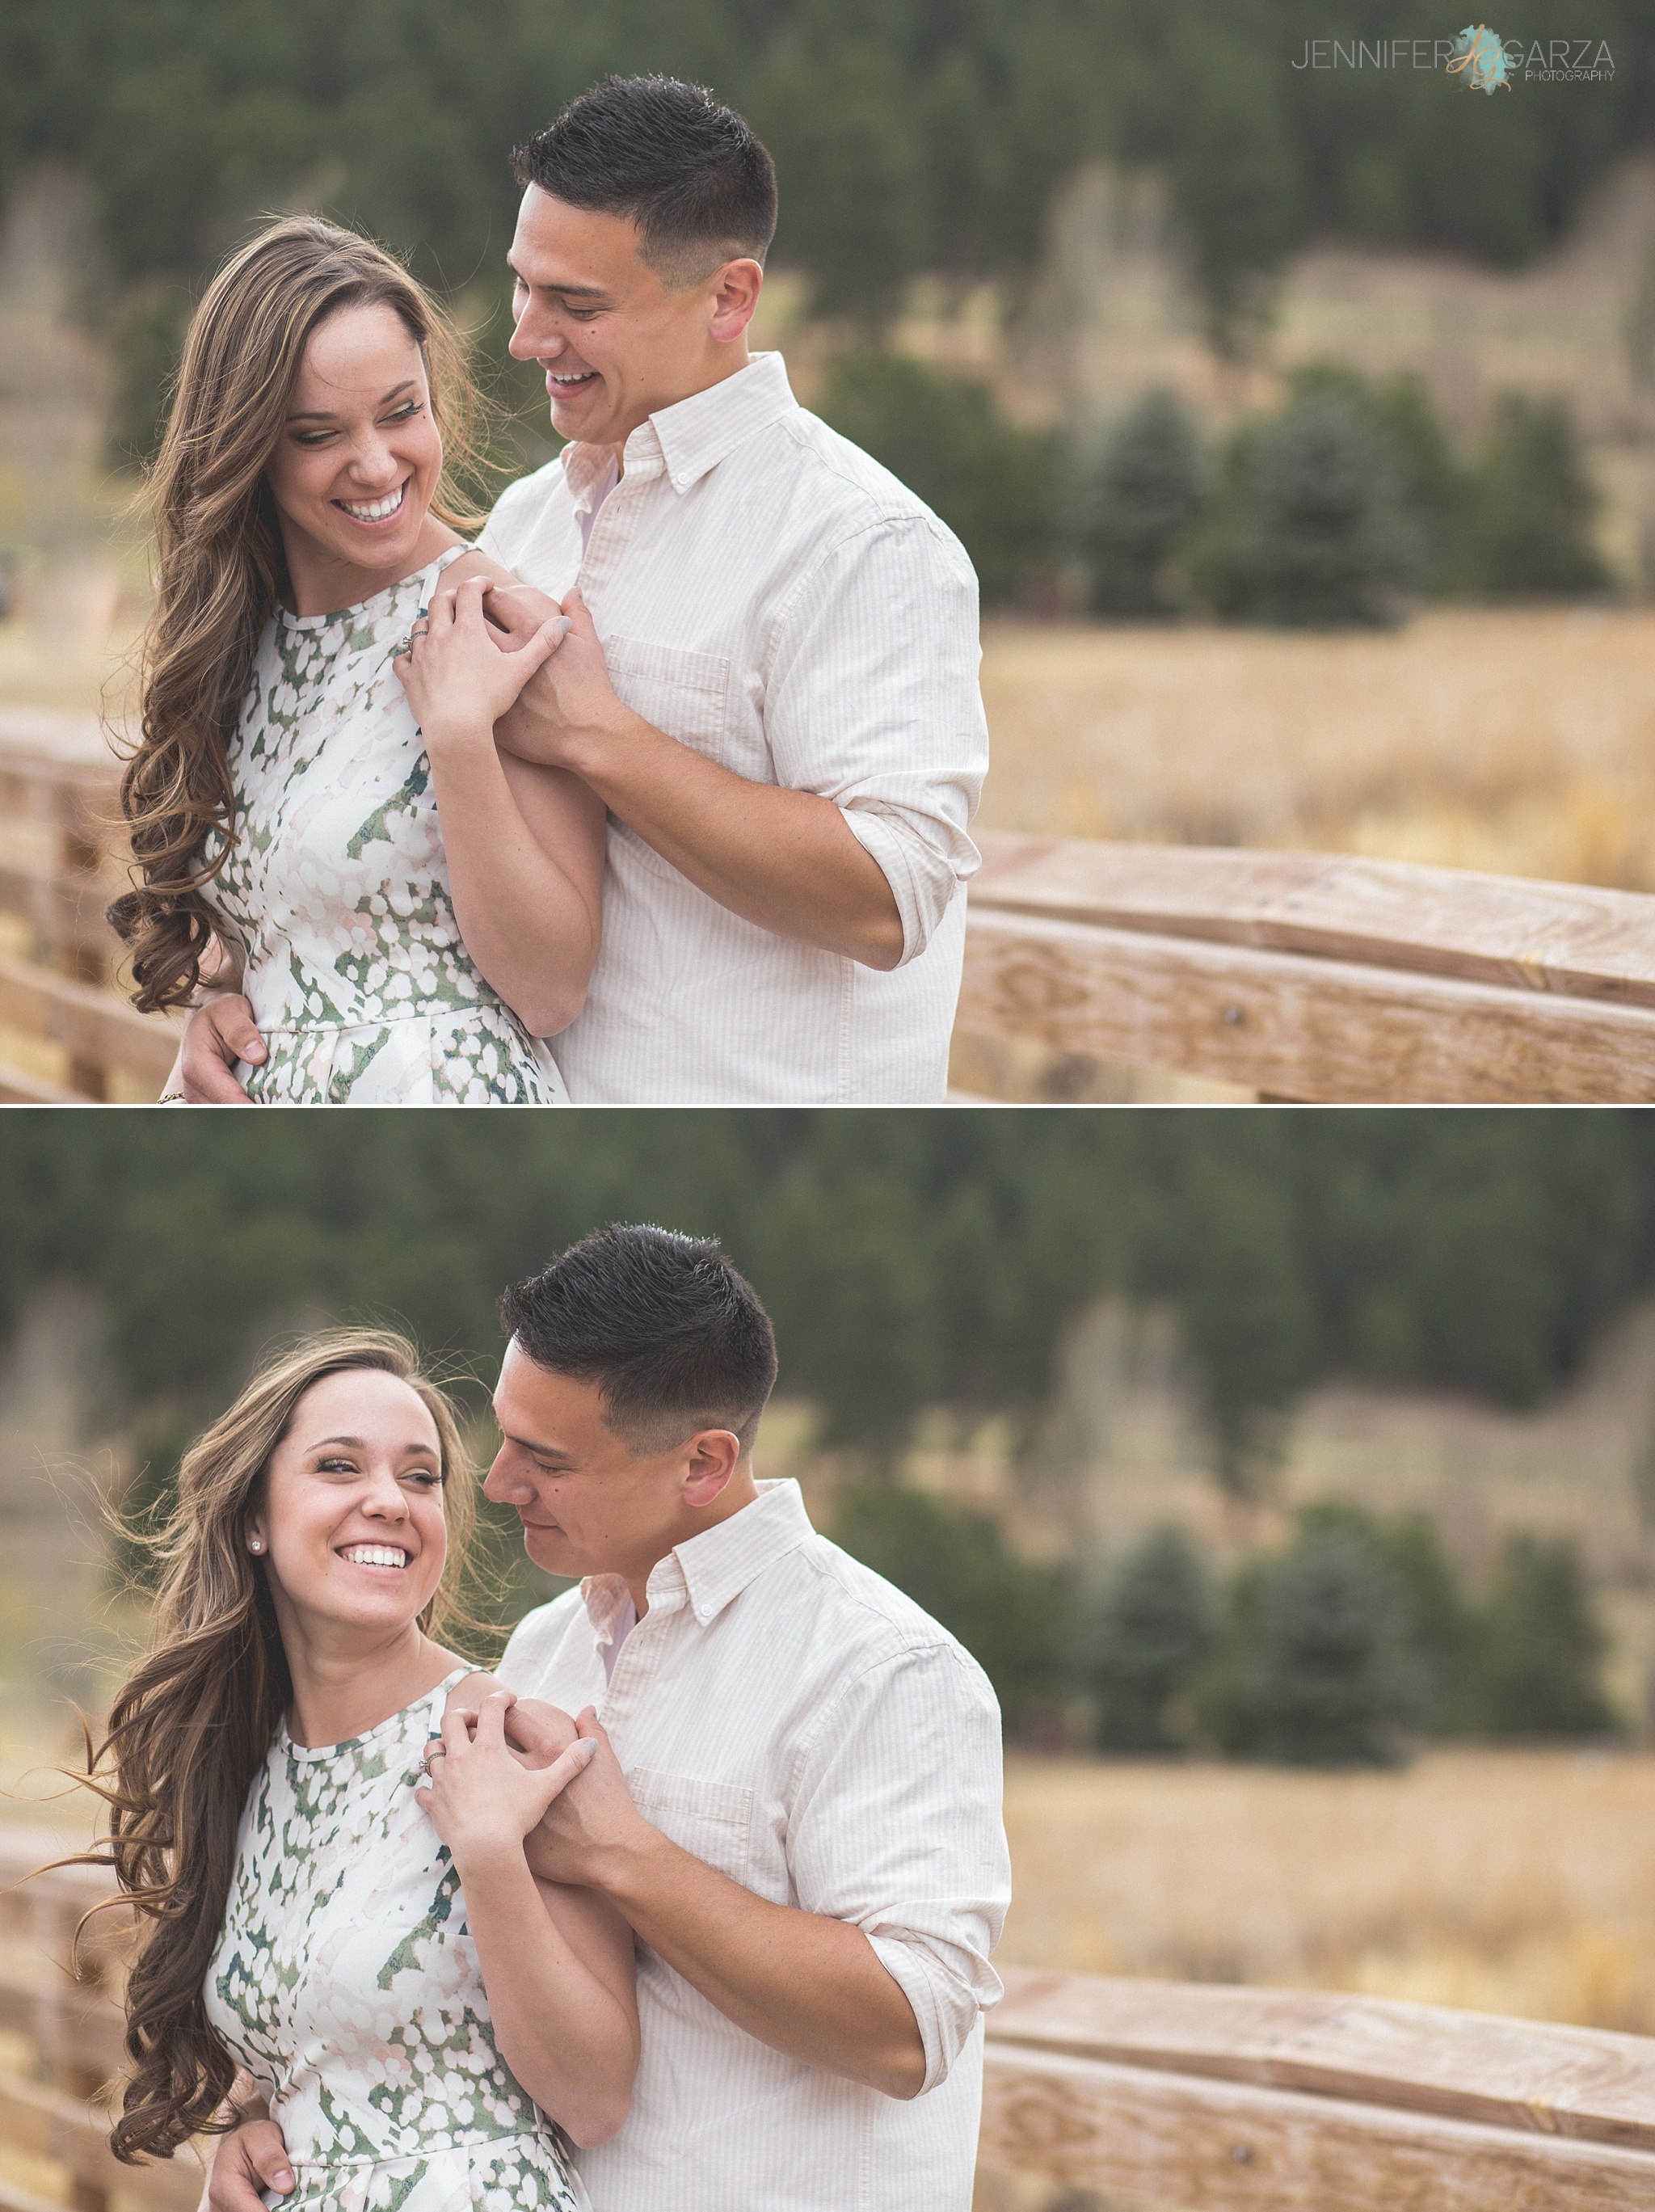 Brooke & Aaron had a great time during their Epic Engagement Shoot at Evergreen Lake House.